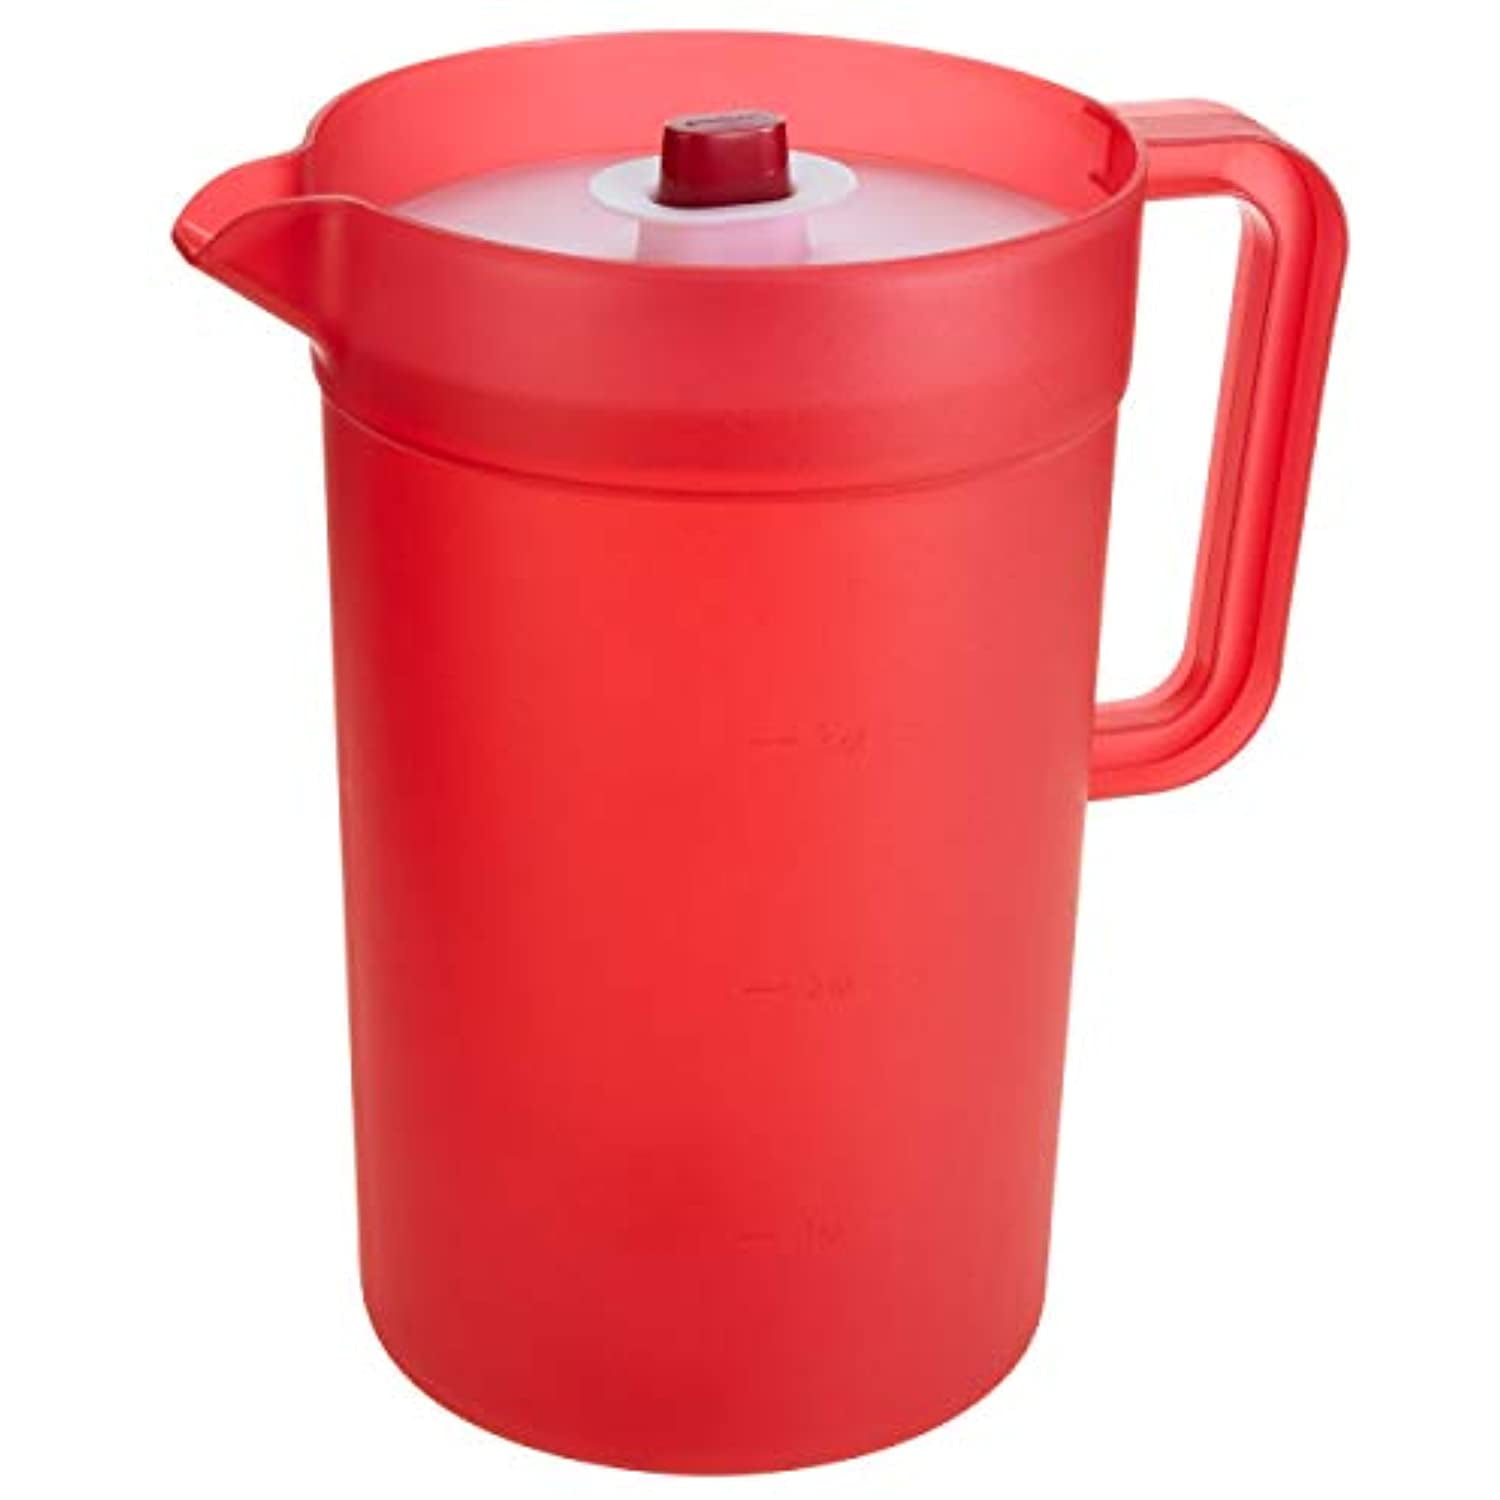  Uiifan 4 Pcs Plastic Water Pitcher with Lid, 1 Gallon